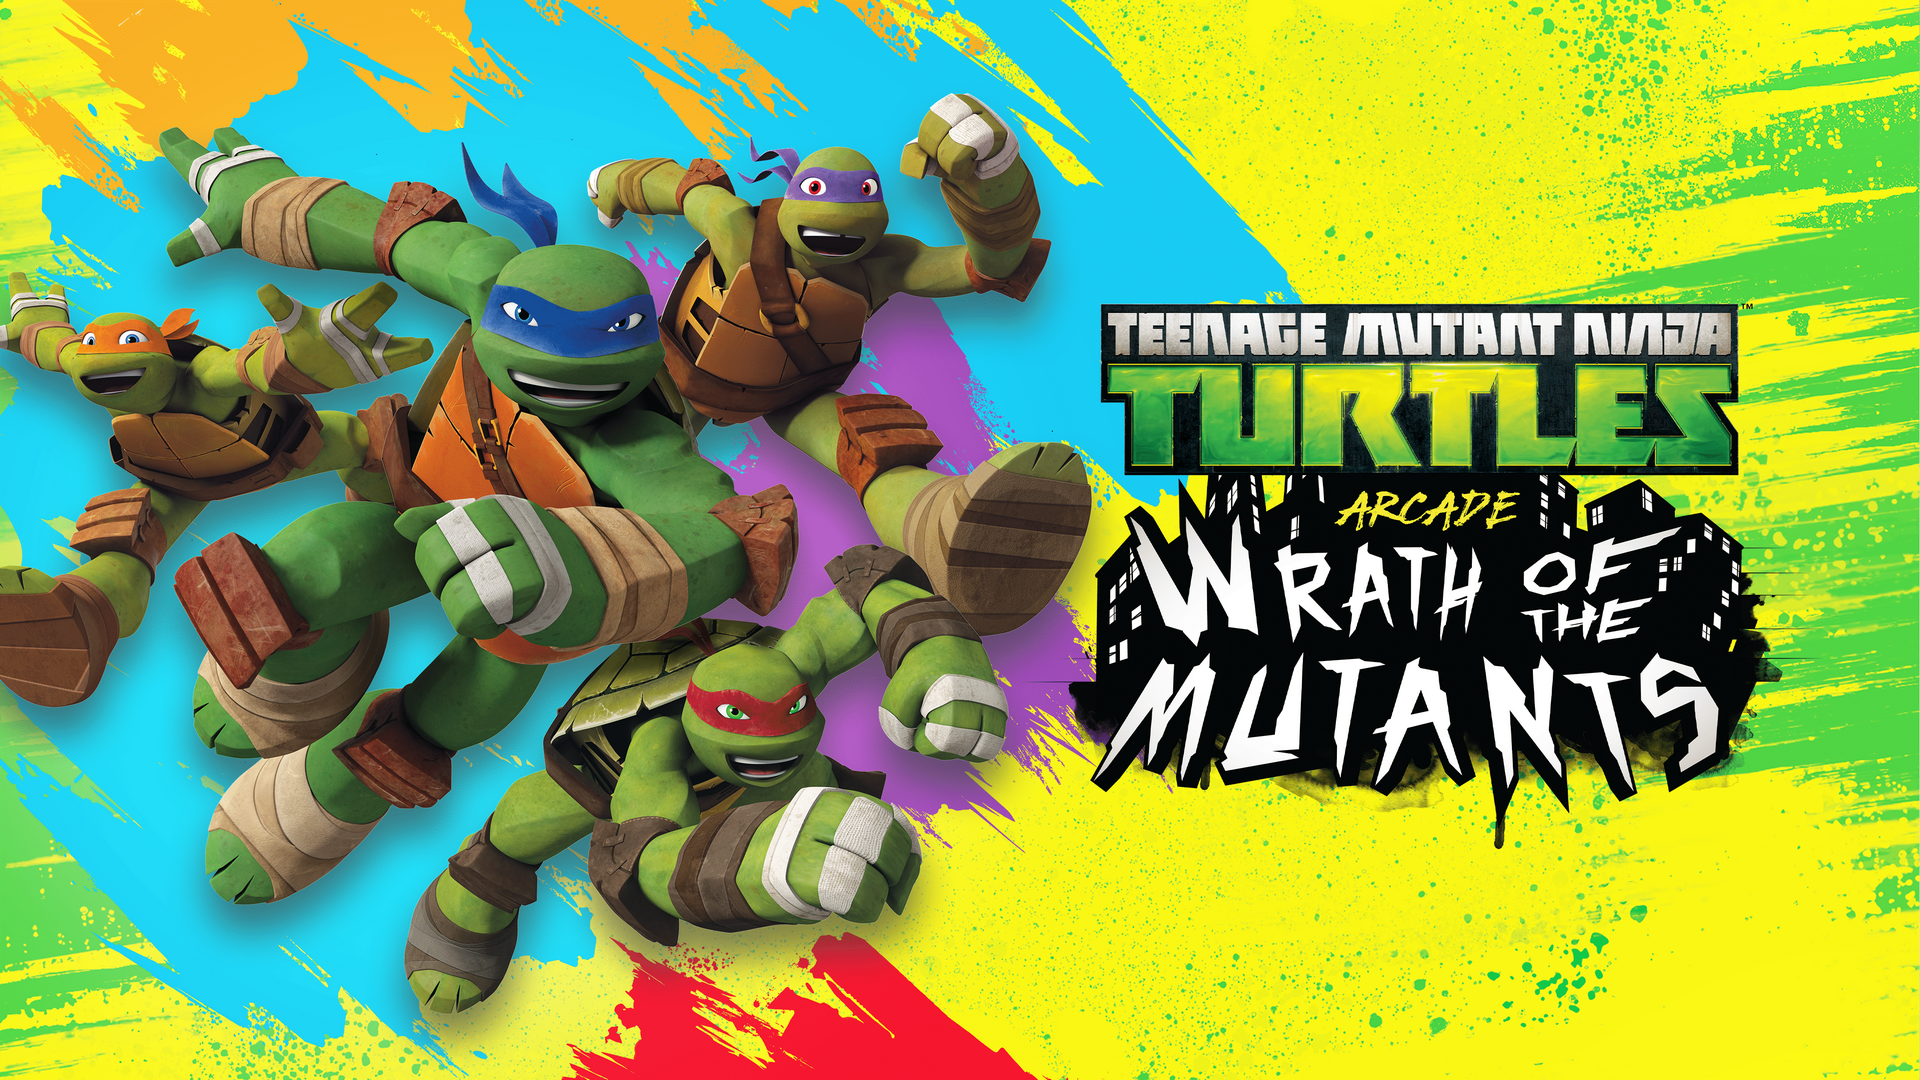 Prepare To Be Shell-Shocked! – Teenage Mutant Ninja Turtles Arcade: Wrath Of The Mutants Is Available Now